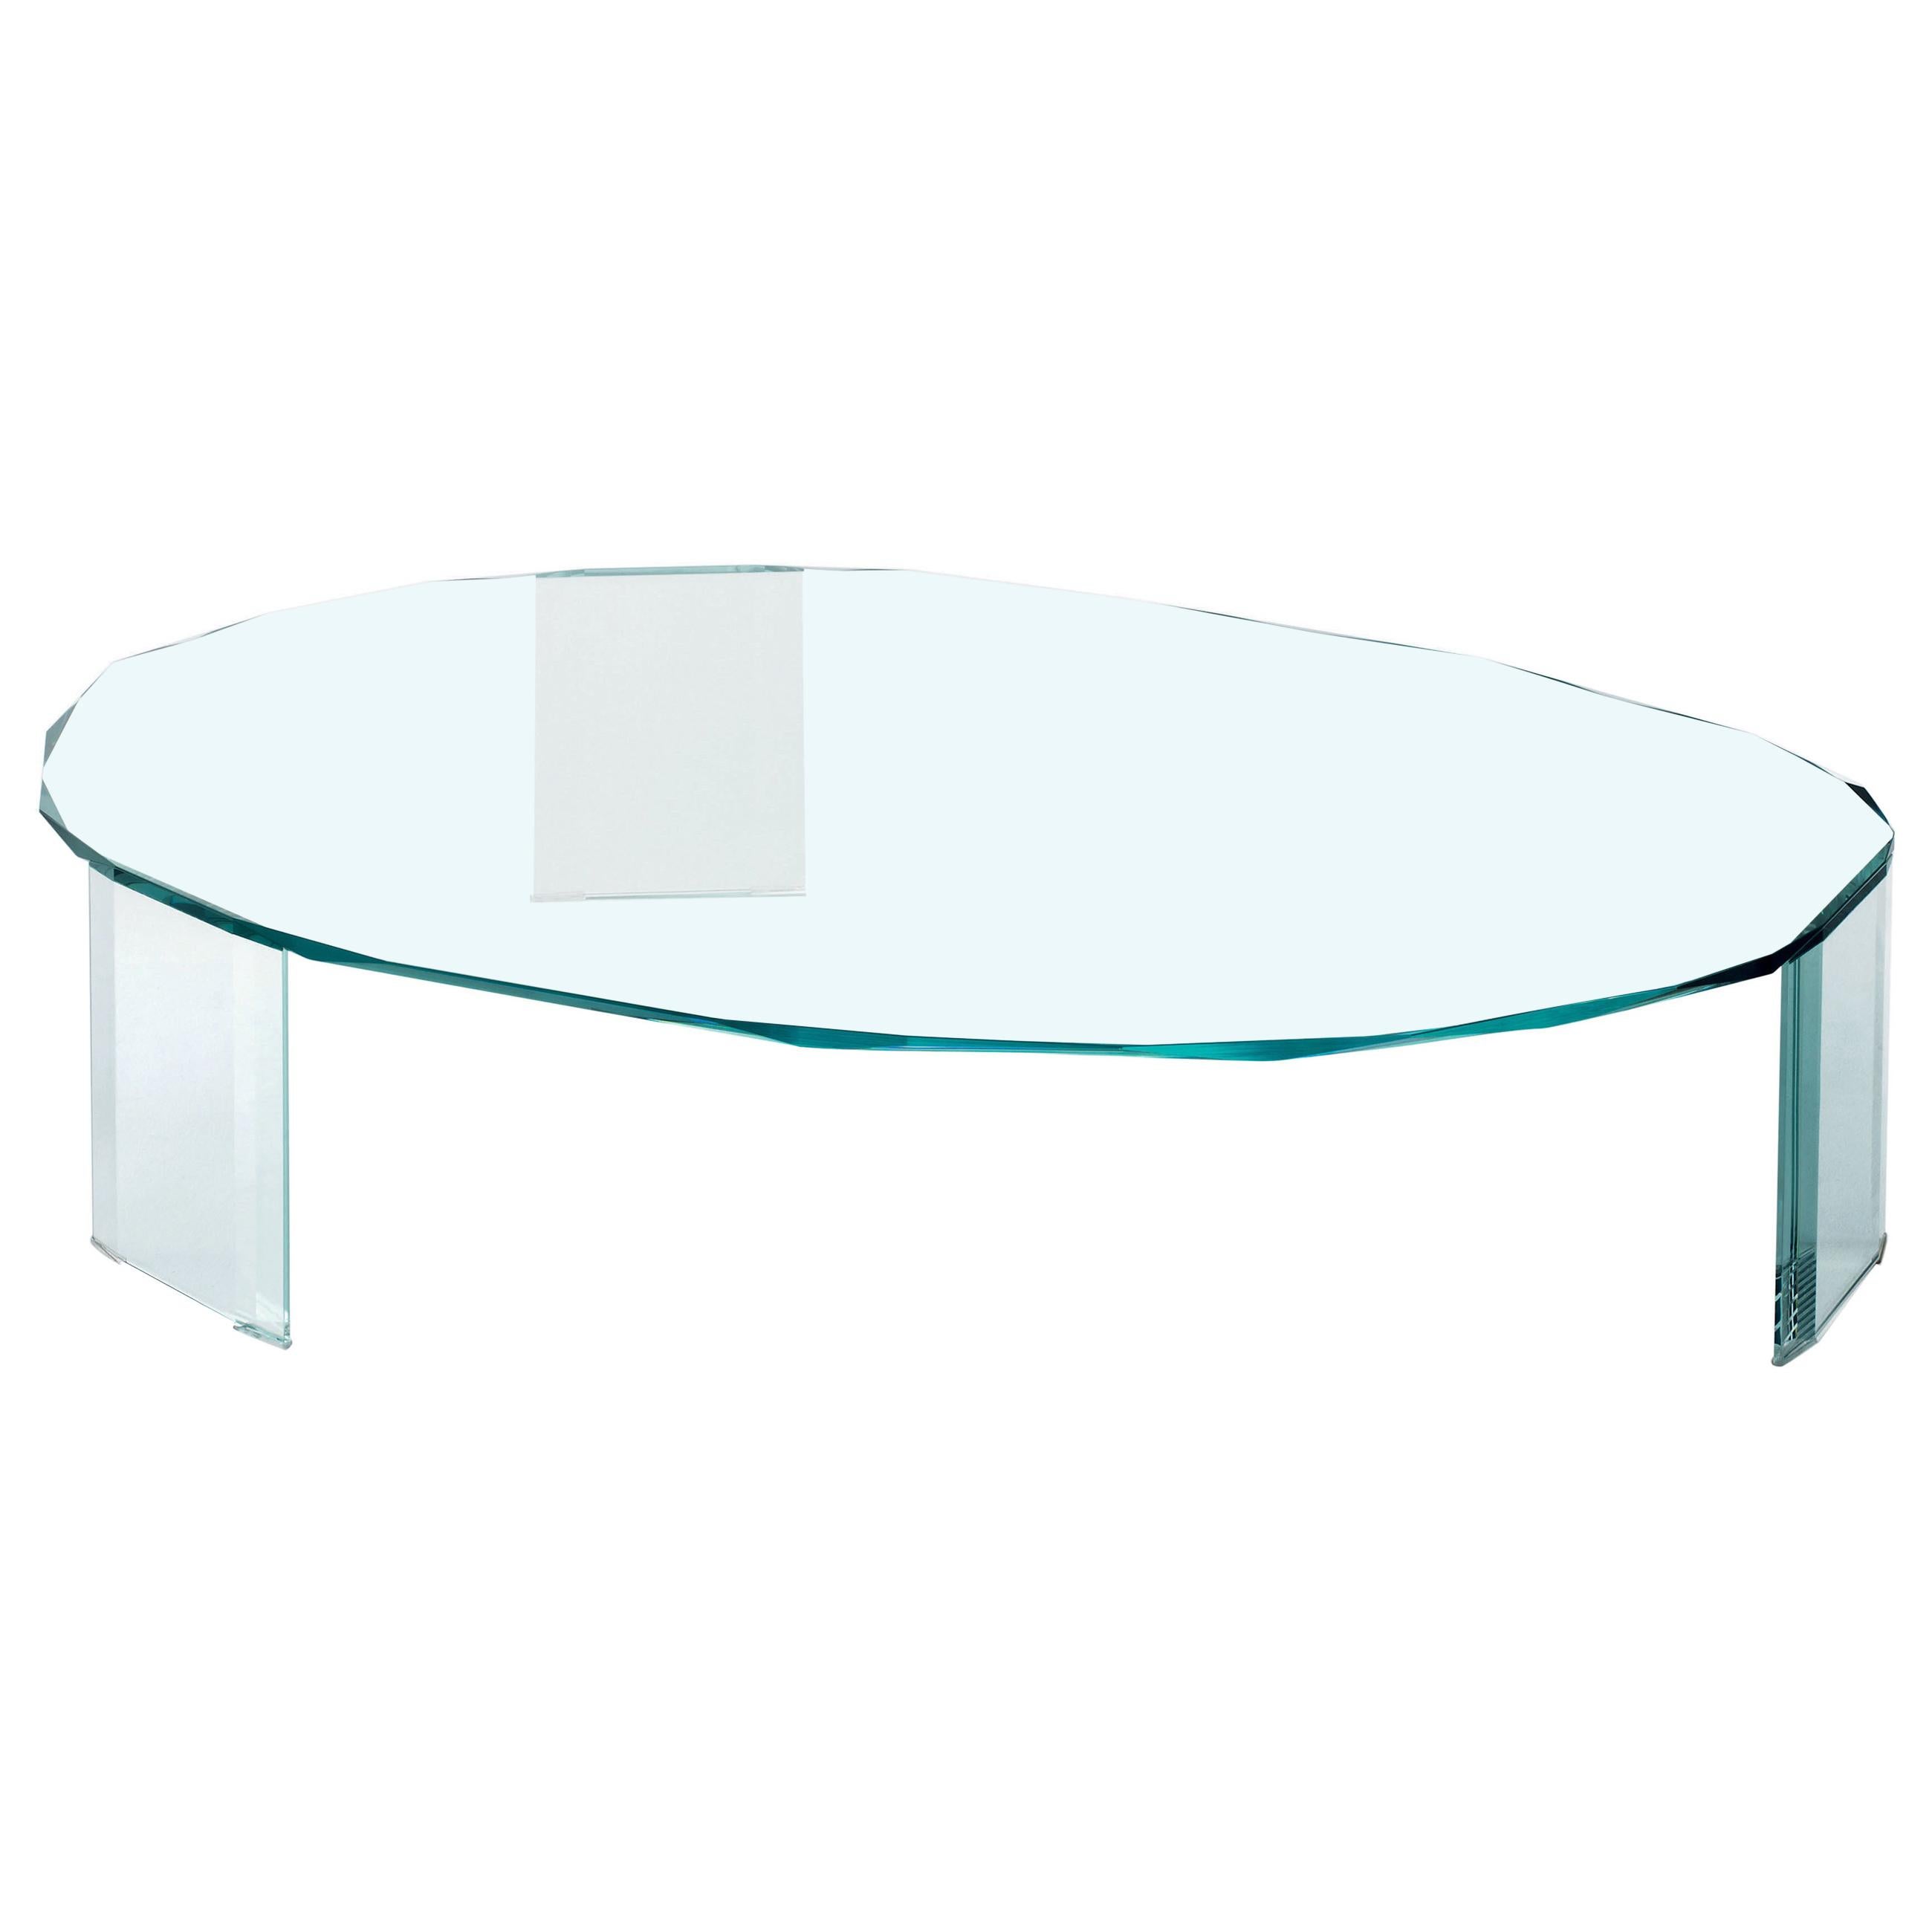 KOOH-I-NOOR Transparent Glass Low Table, by Piero Lissoni for Glas Italia